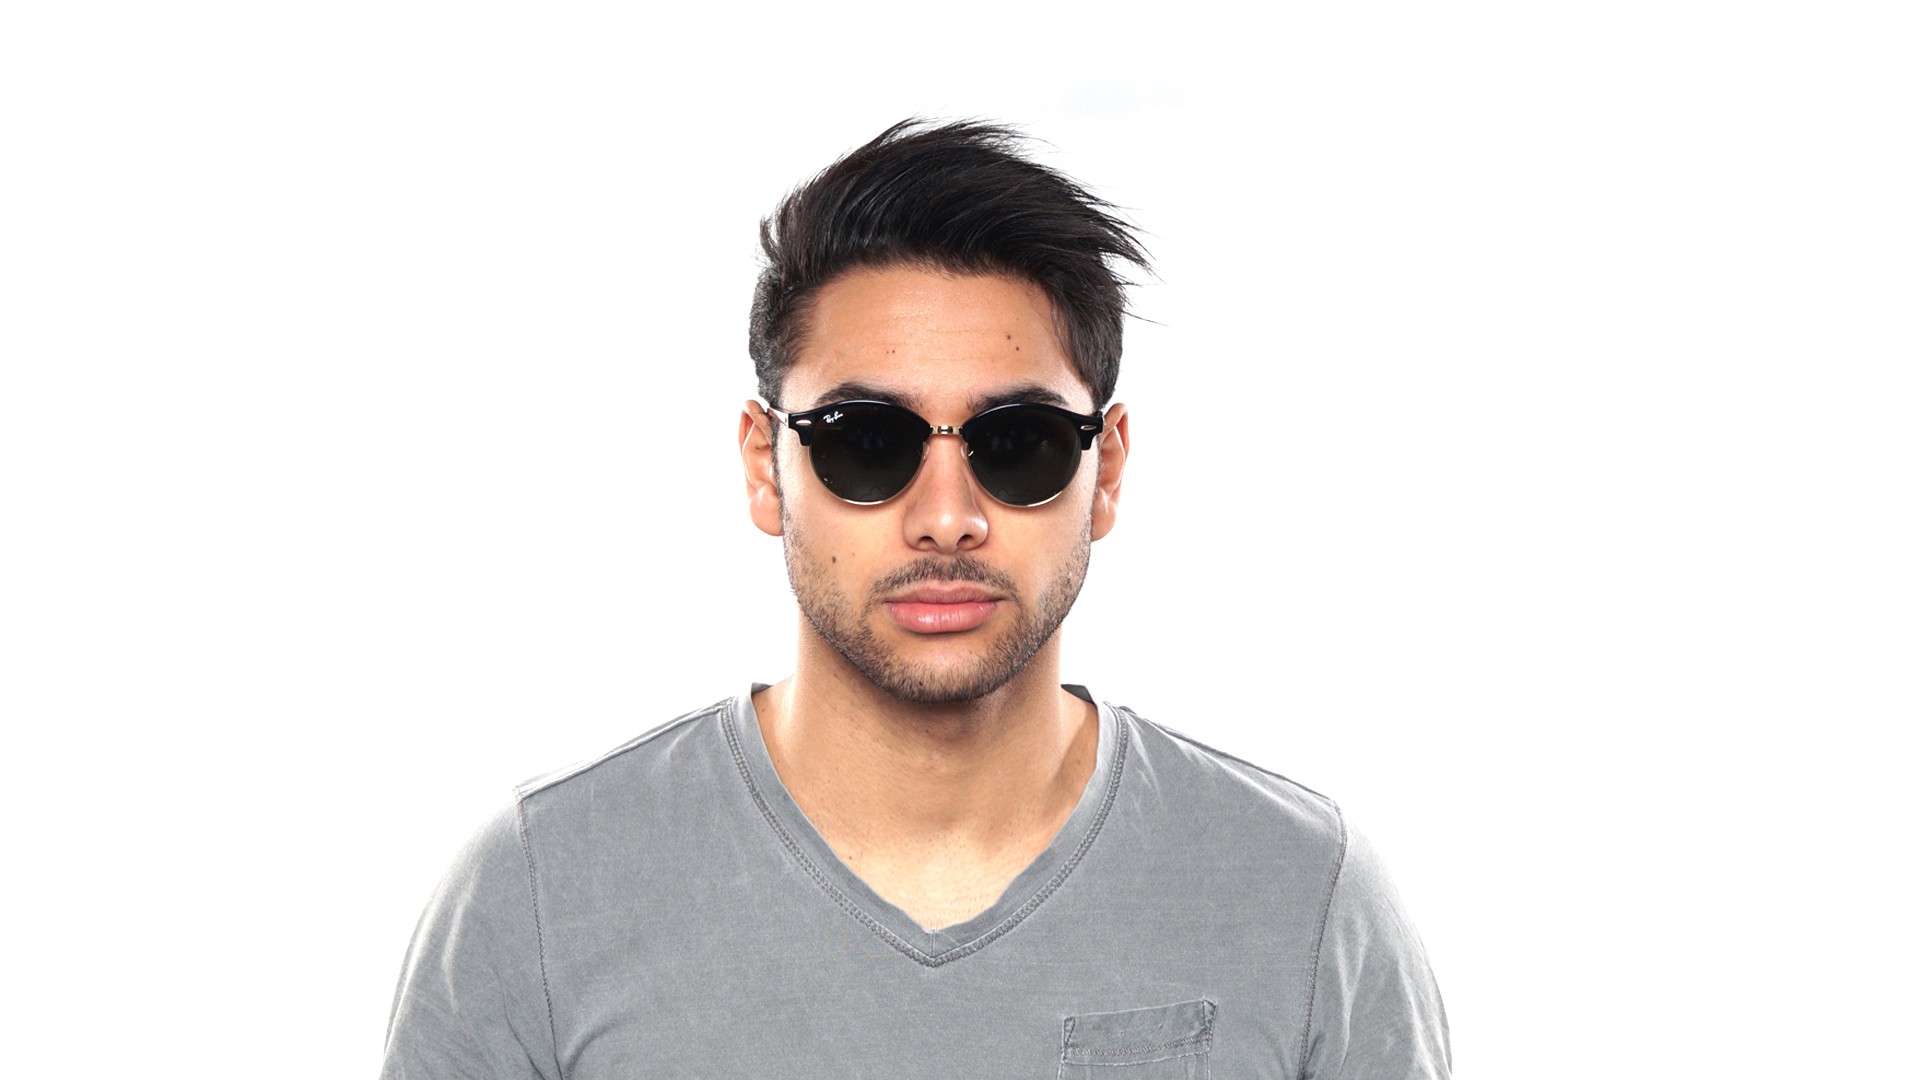 Ray-Ban Clubround Black RB4246 901 51 